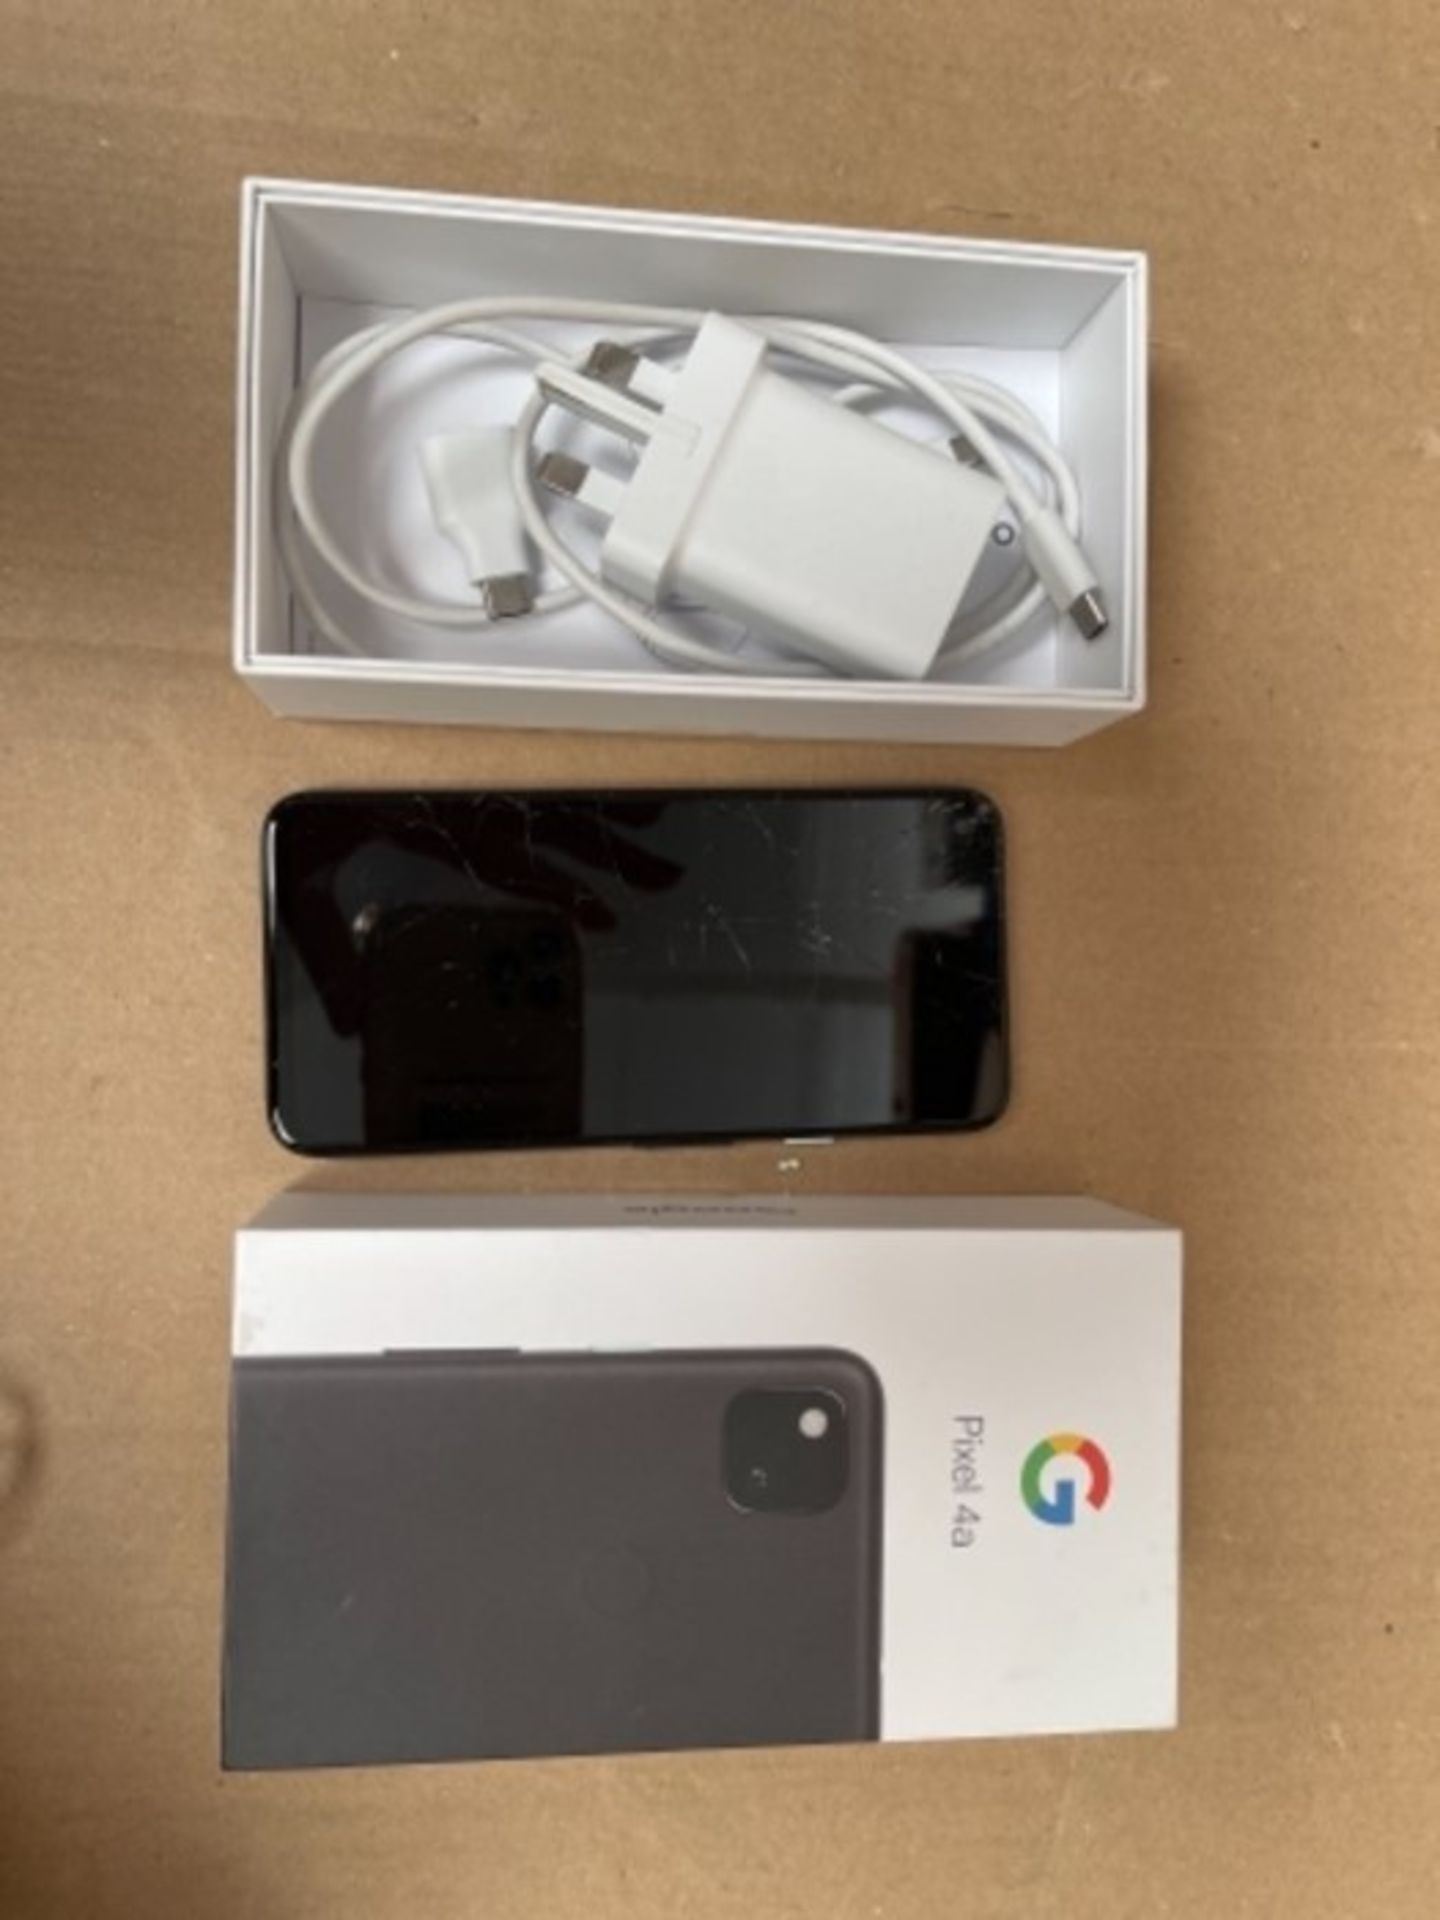 RRP £349.00 Google Pixel 4a Android Mobile Phone- Black, 128GB, 24 hour battery, Nightsight, SIM F - Image 2 of 3